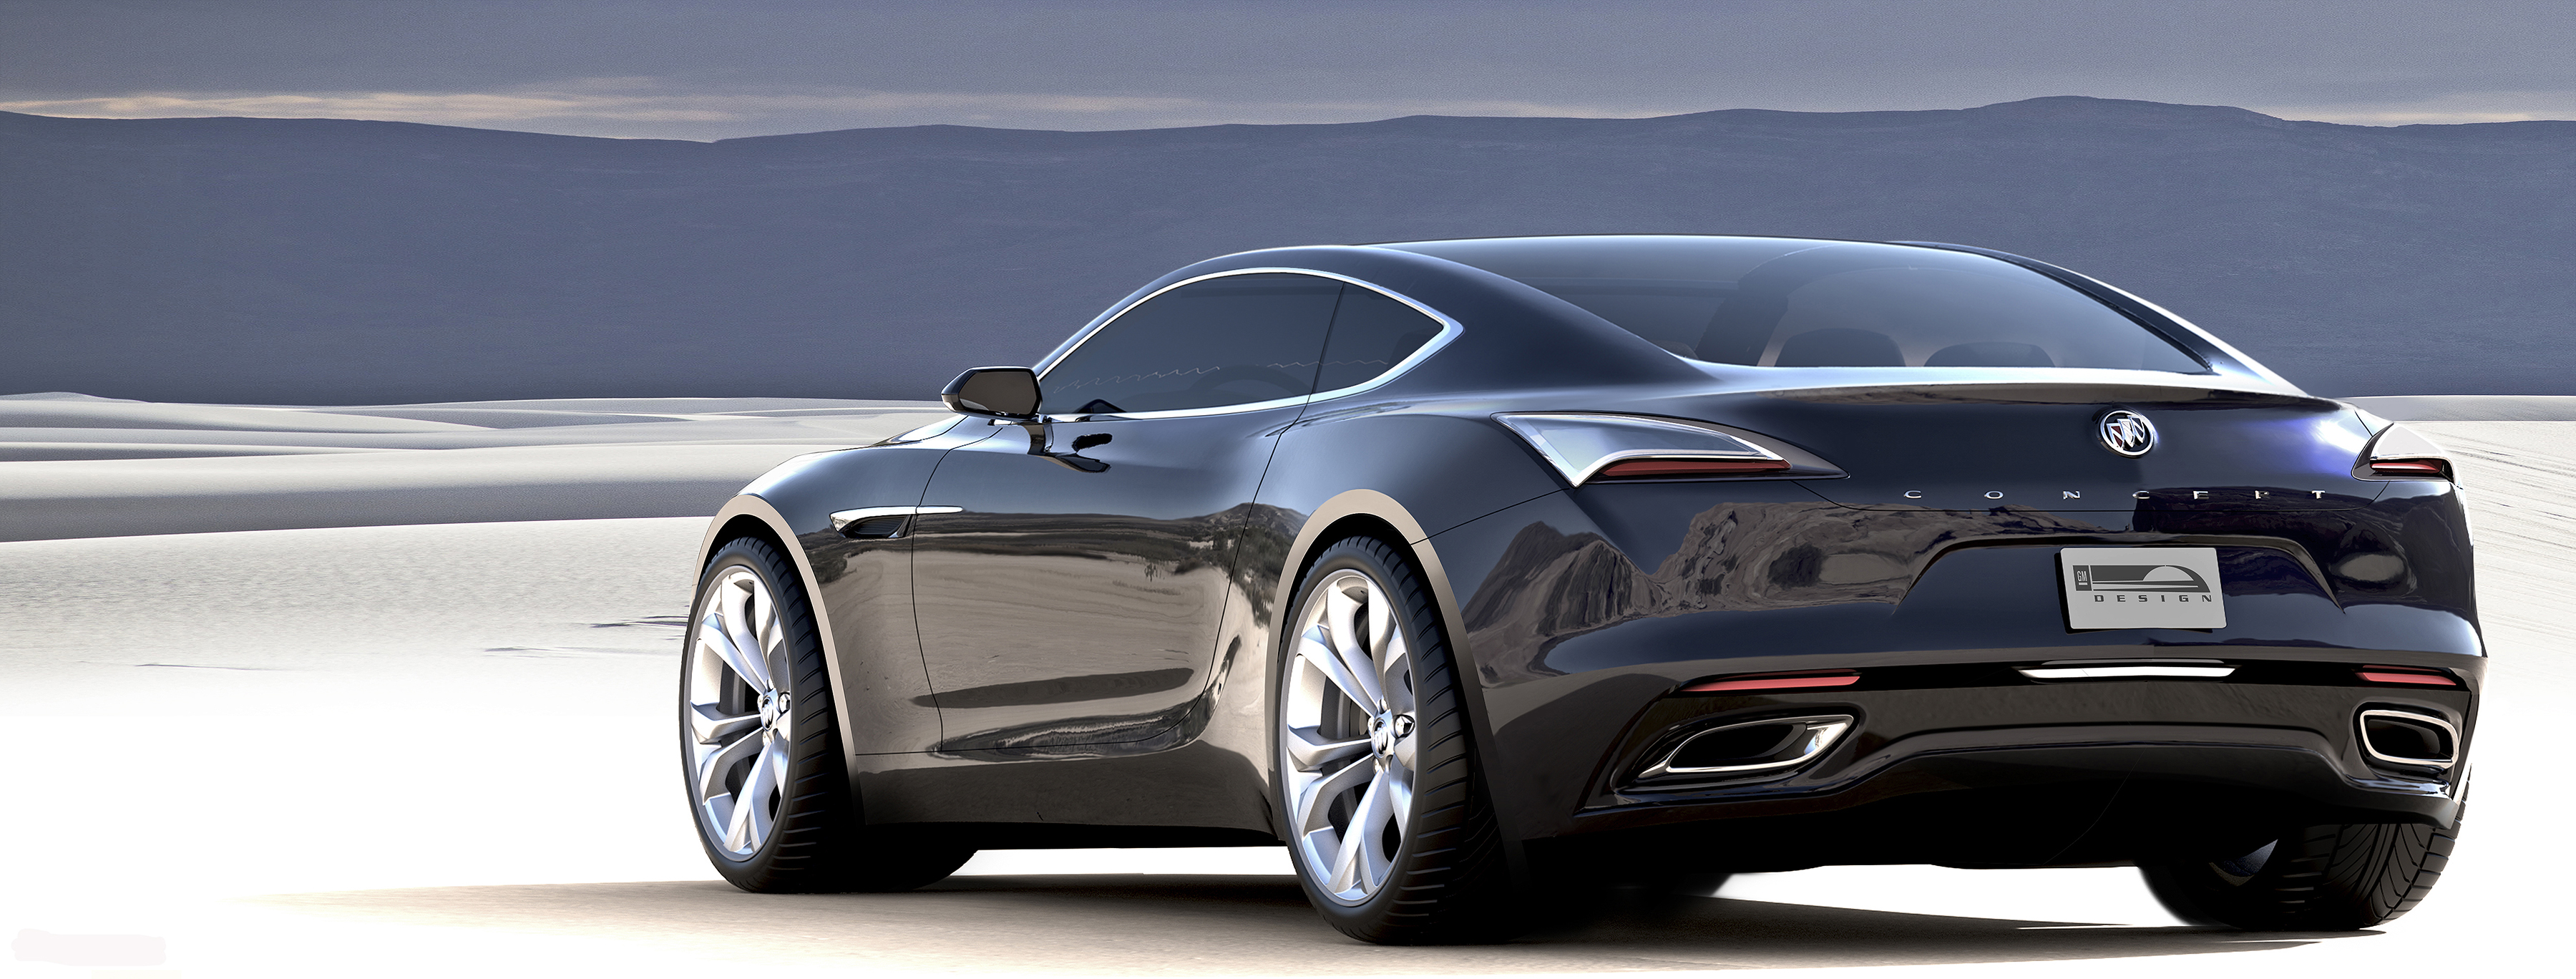 2016 buick concept